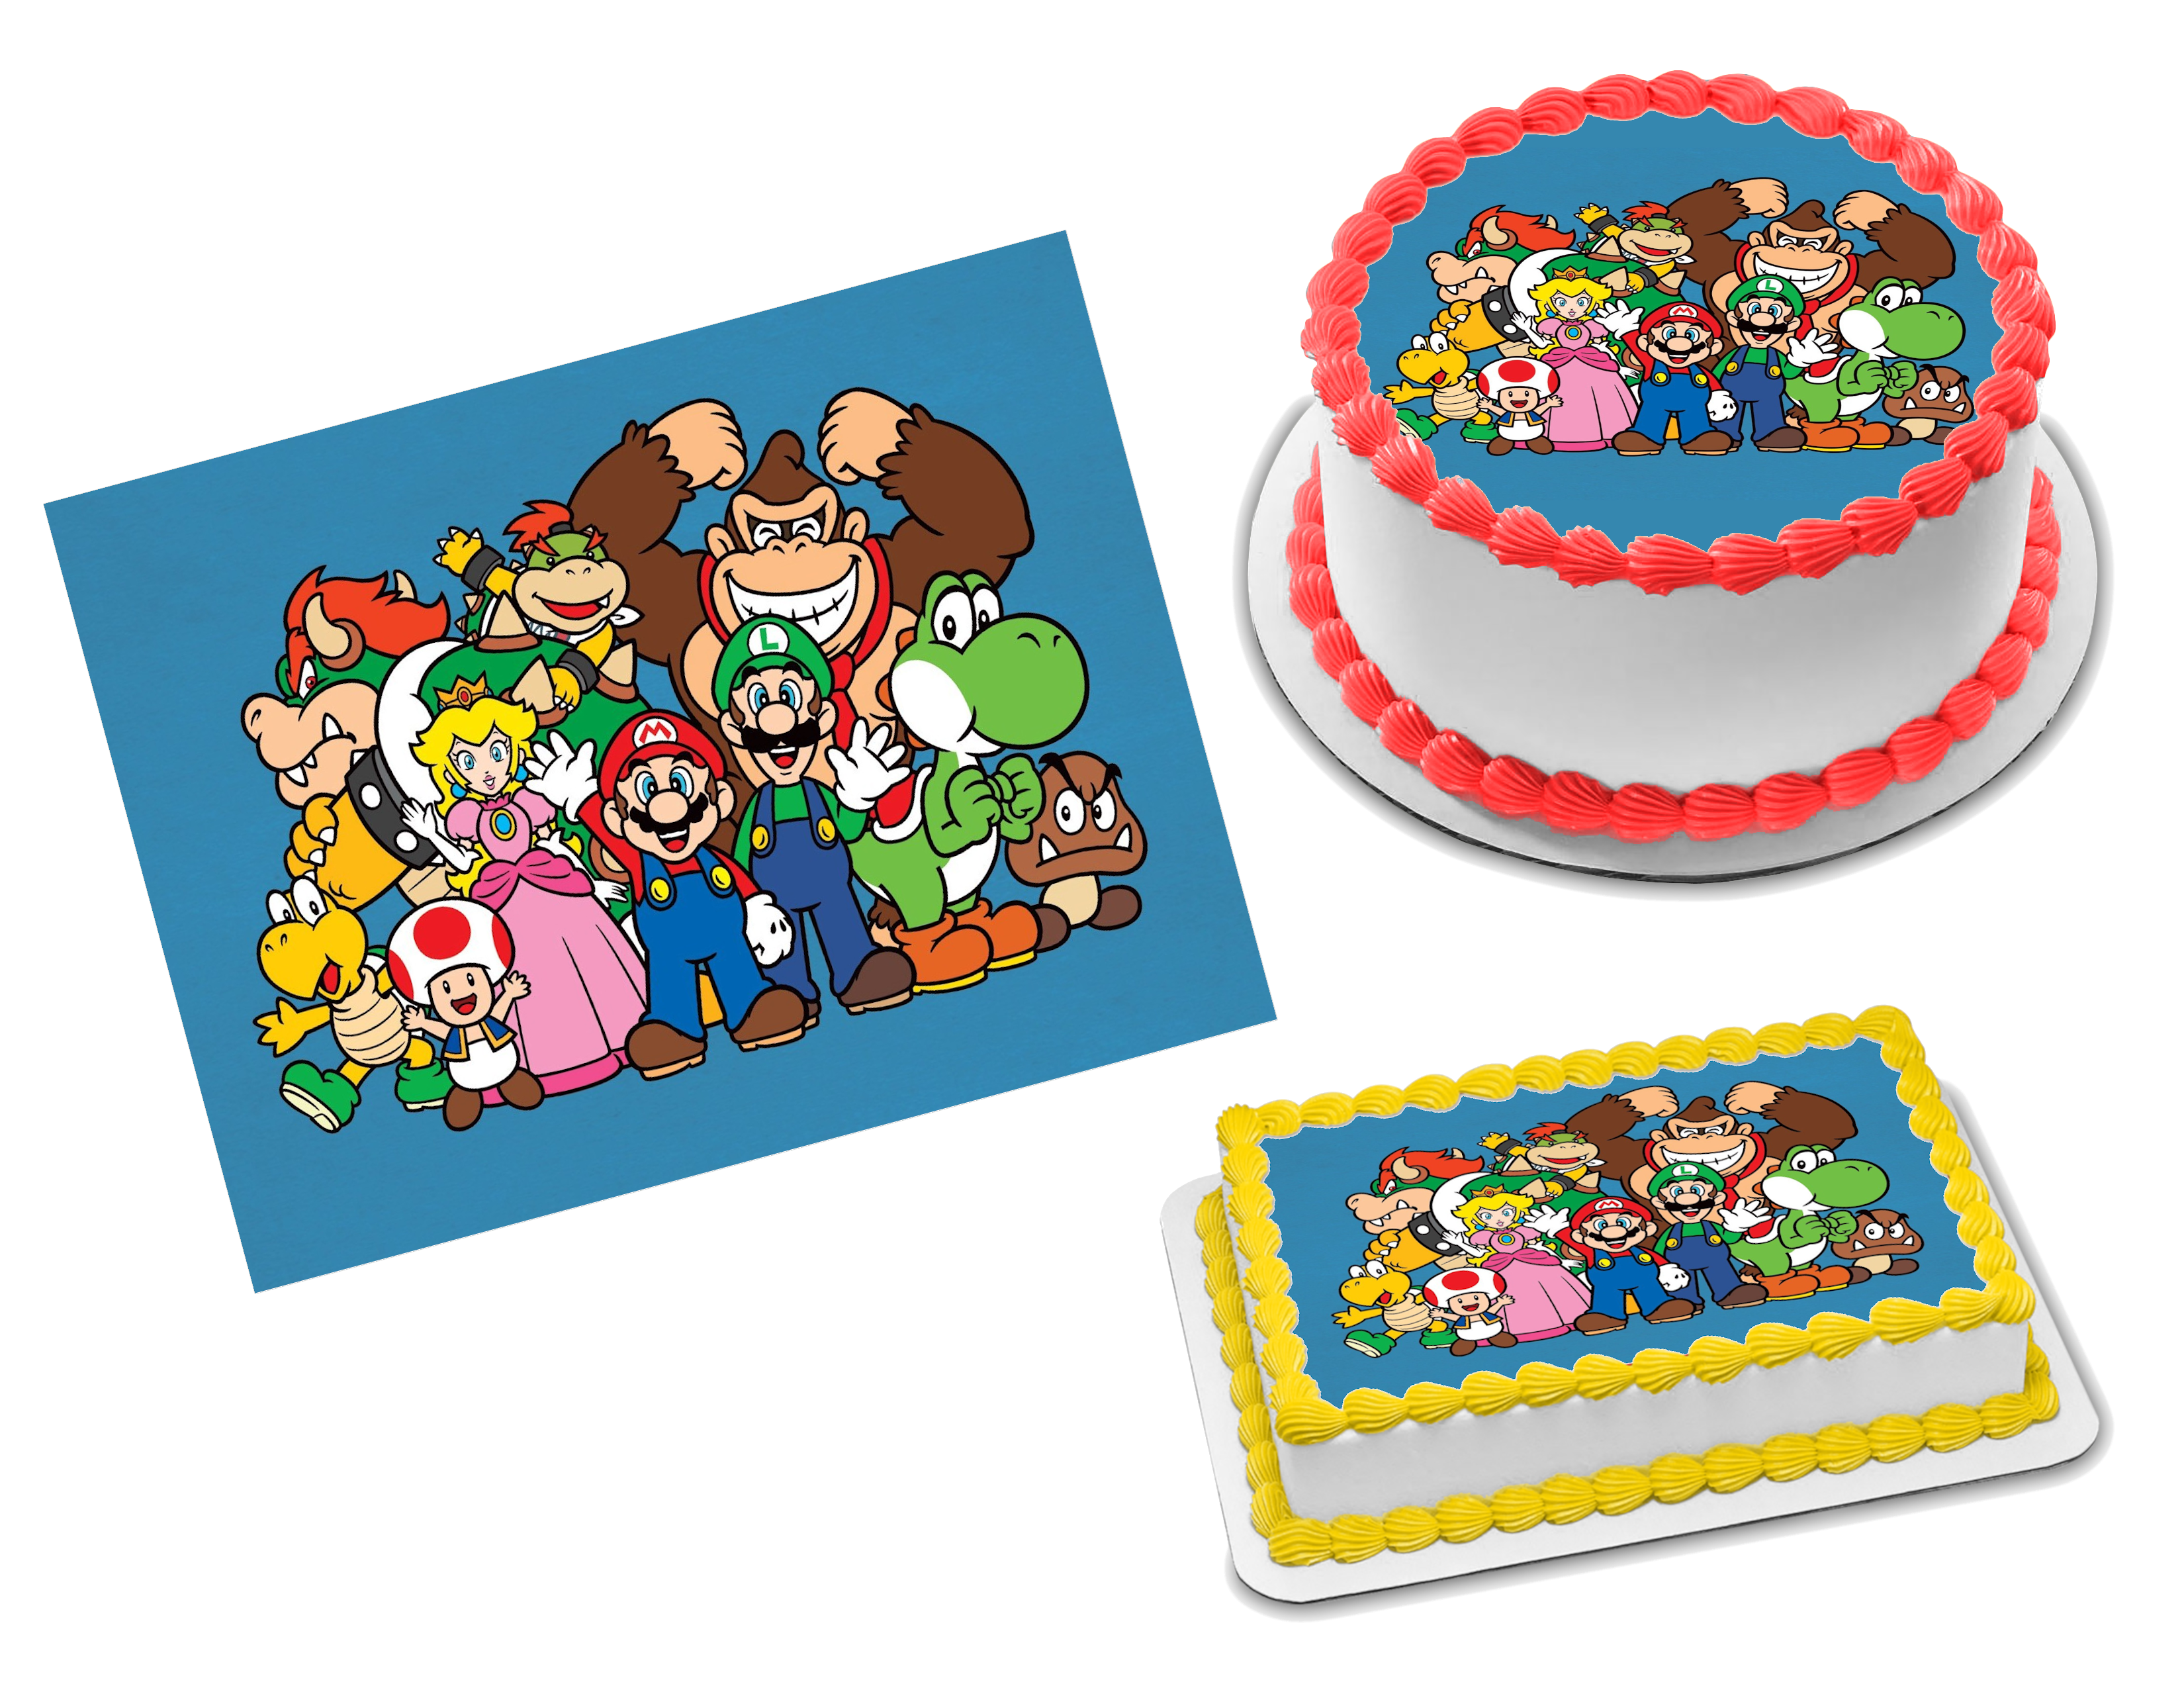 Mario and sonic Birthday Cake topper Edible picture sugar sheet icing decal